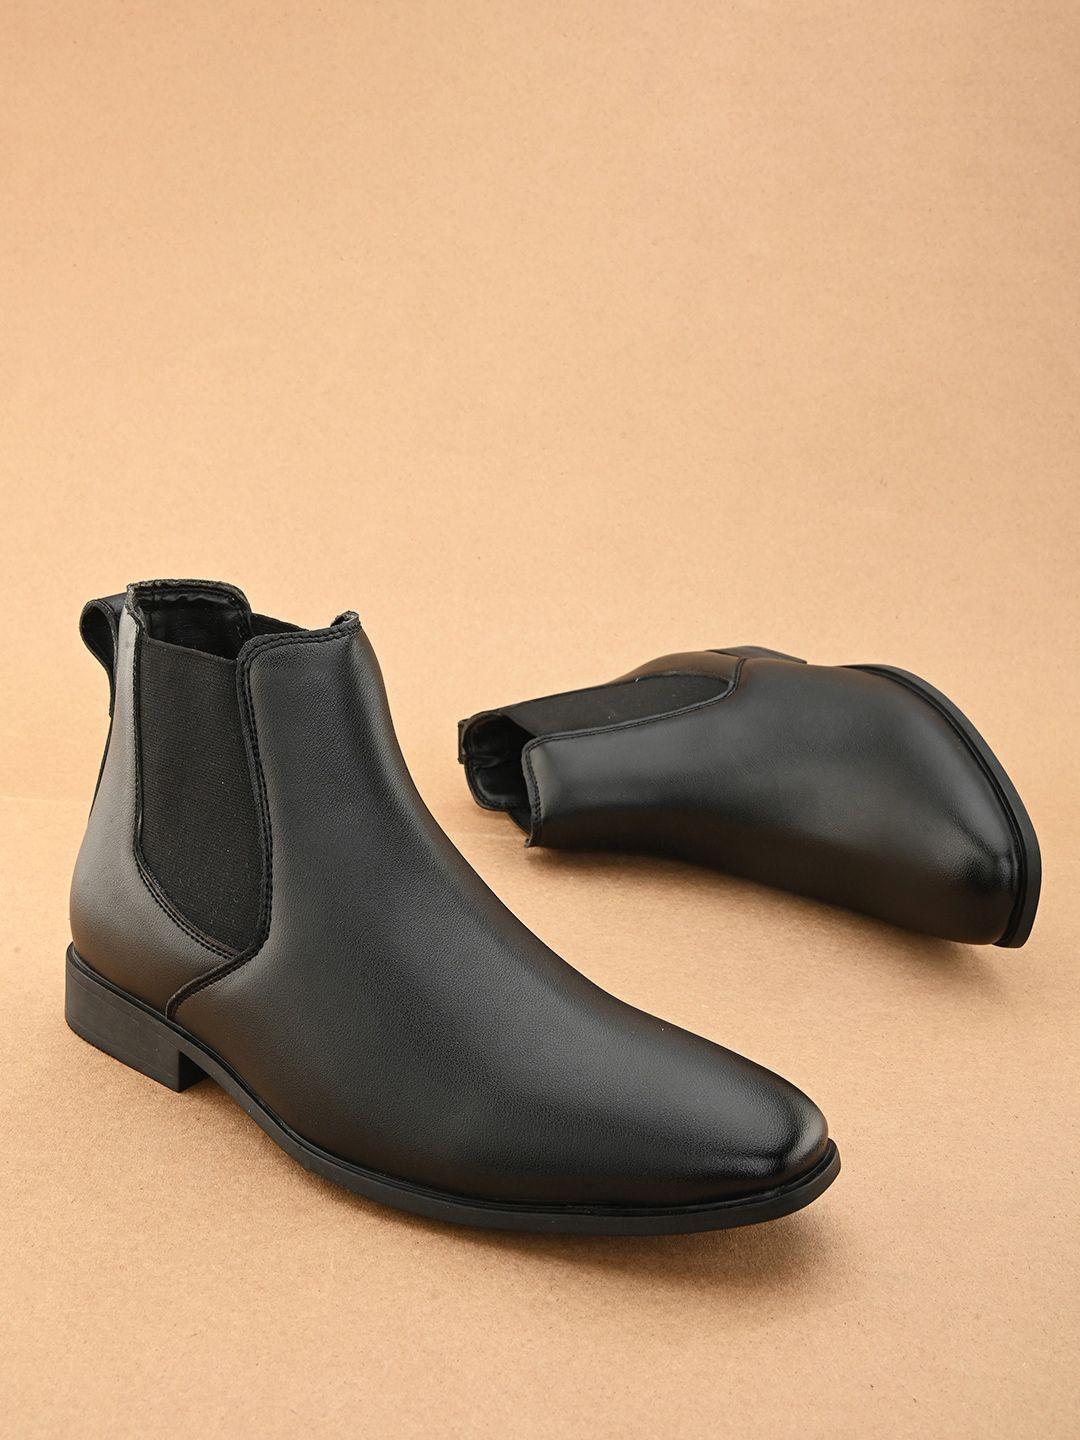 the roadster lifestyle co. men mid-top chelsea boots